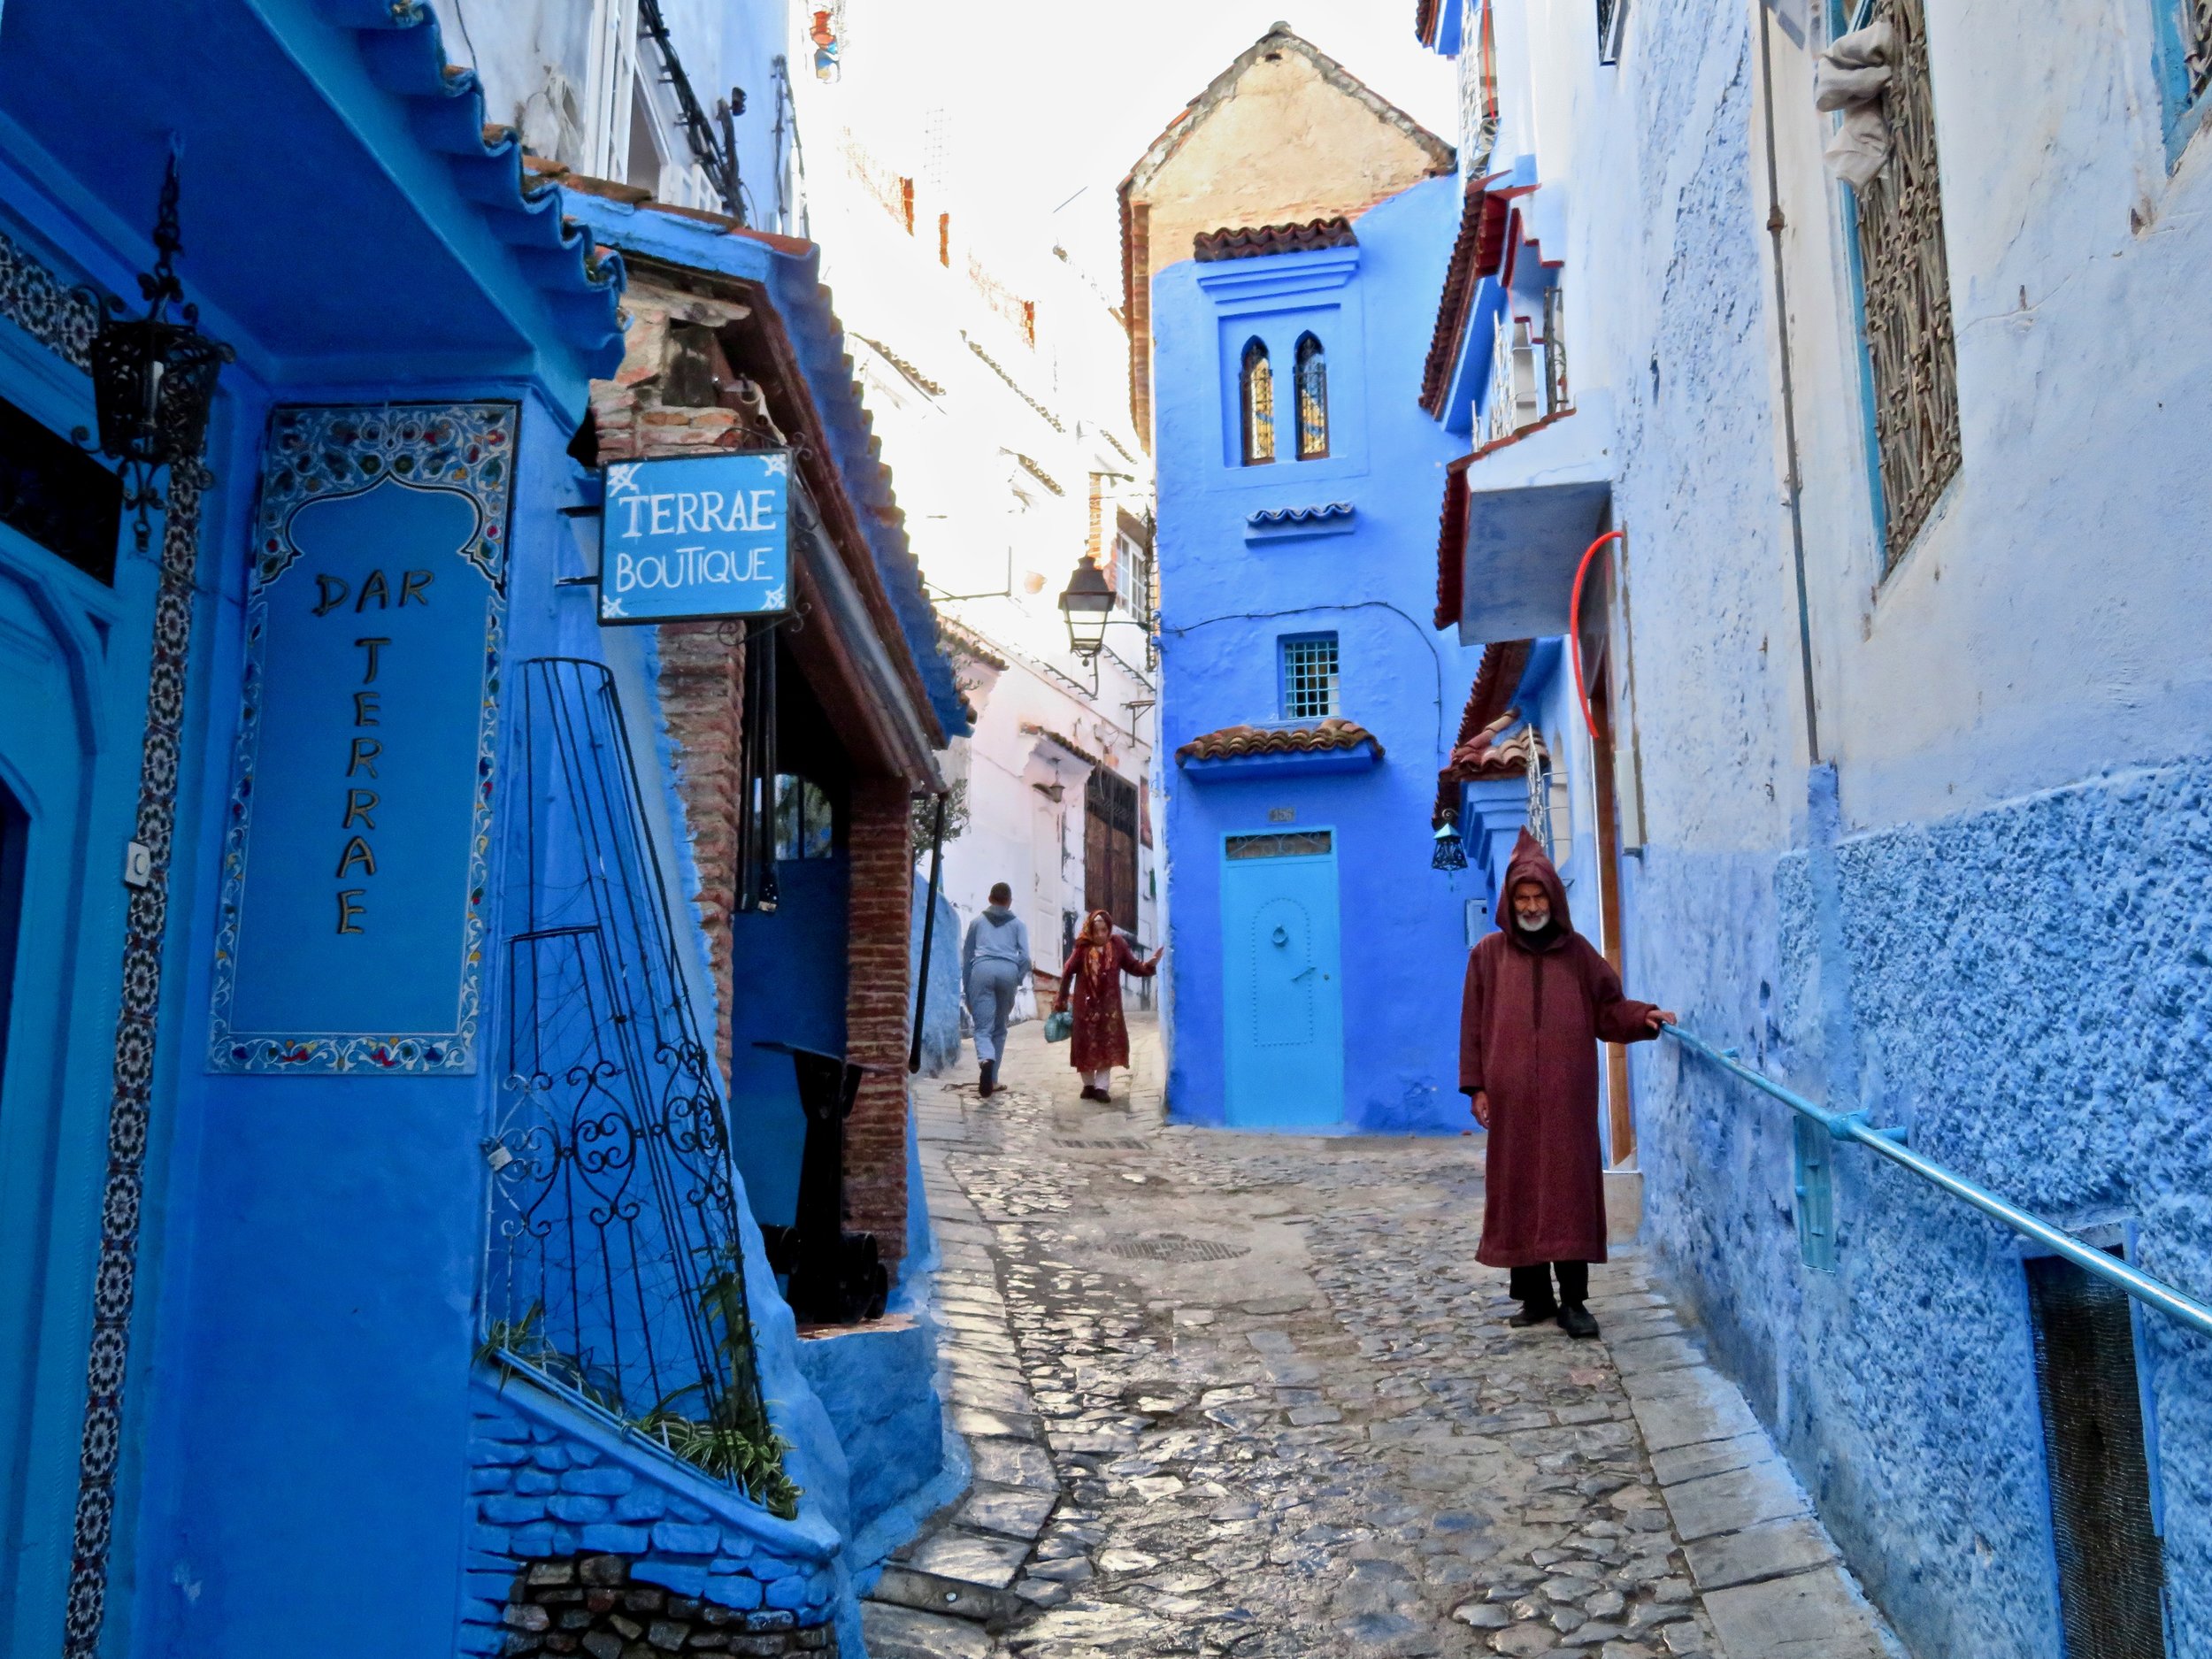 Fifty shades of blue-on-blue in Chefchaouen